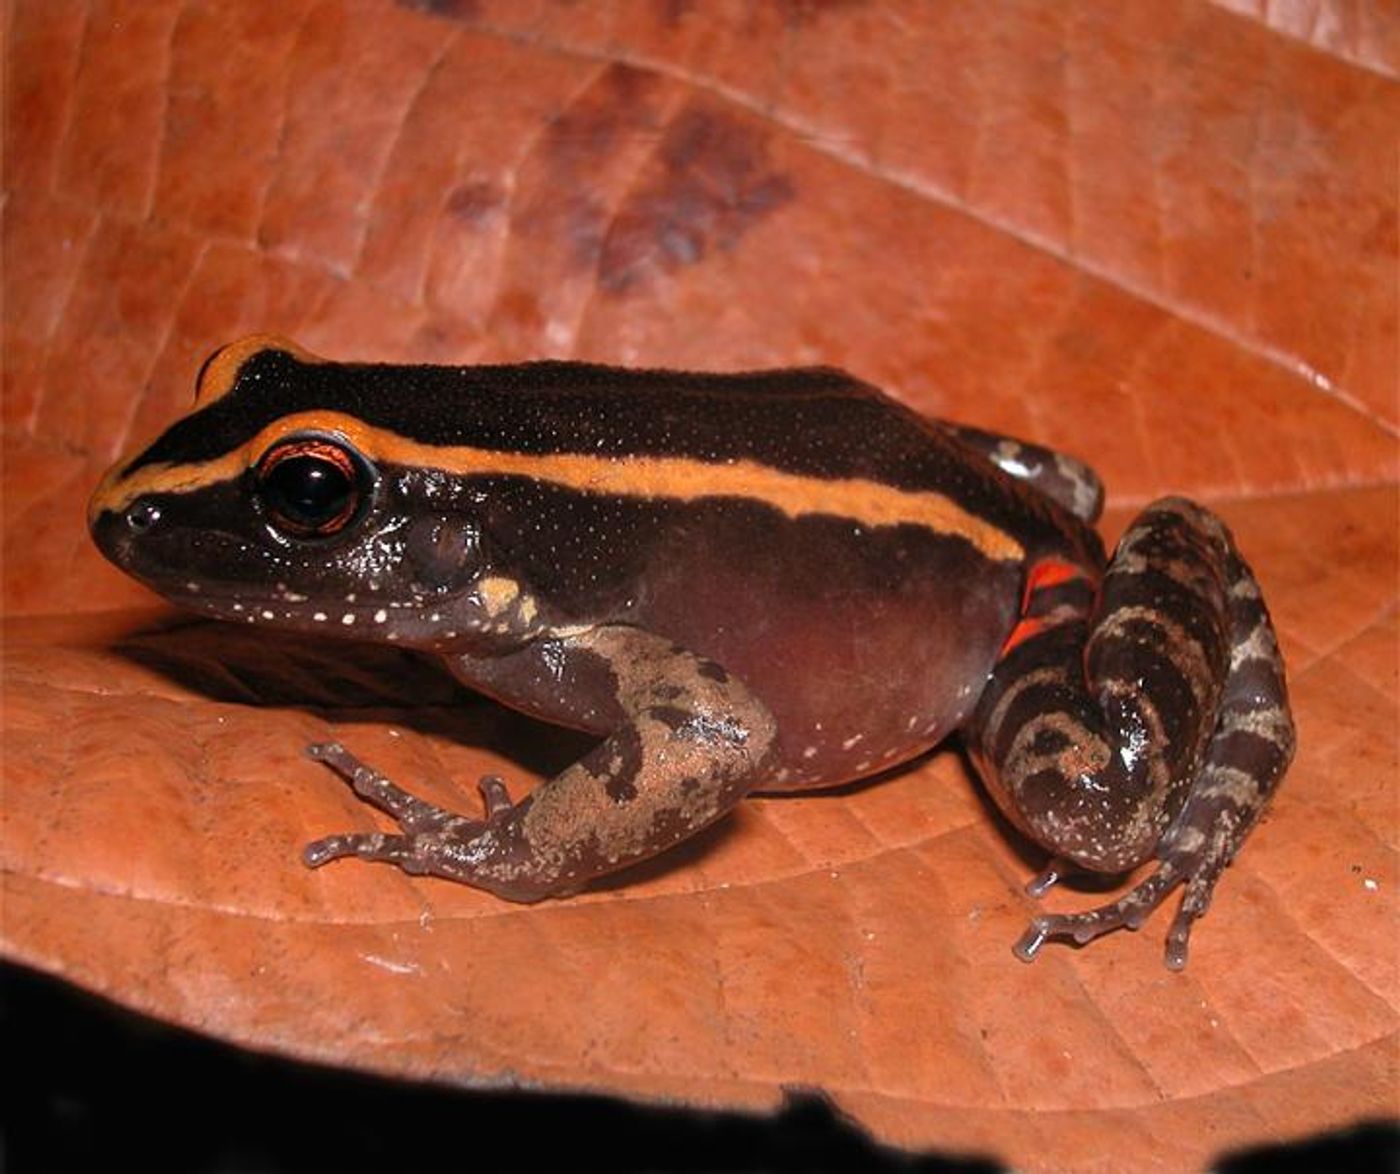 This frog can protect itself from leaf-cutter ants by using a special chemical.